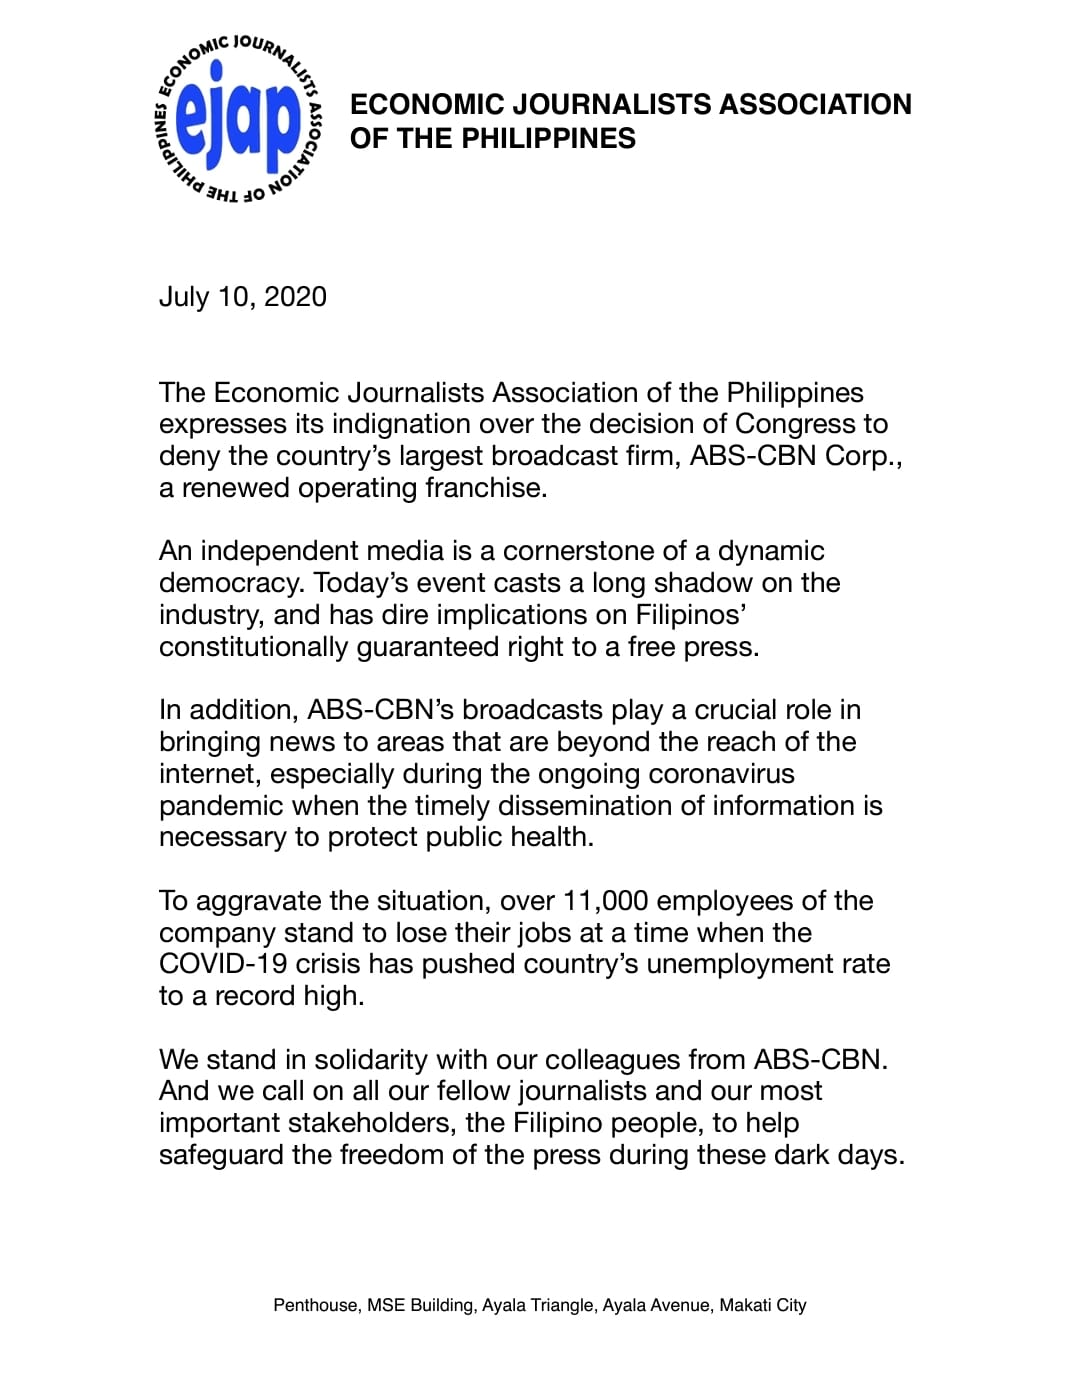 READ: Journalists, news groups issue statements supporting ABS-CBN 4